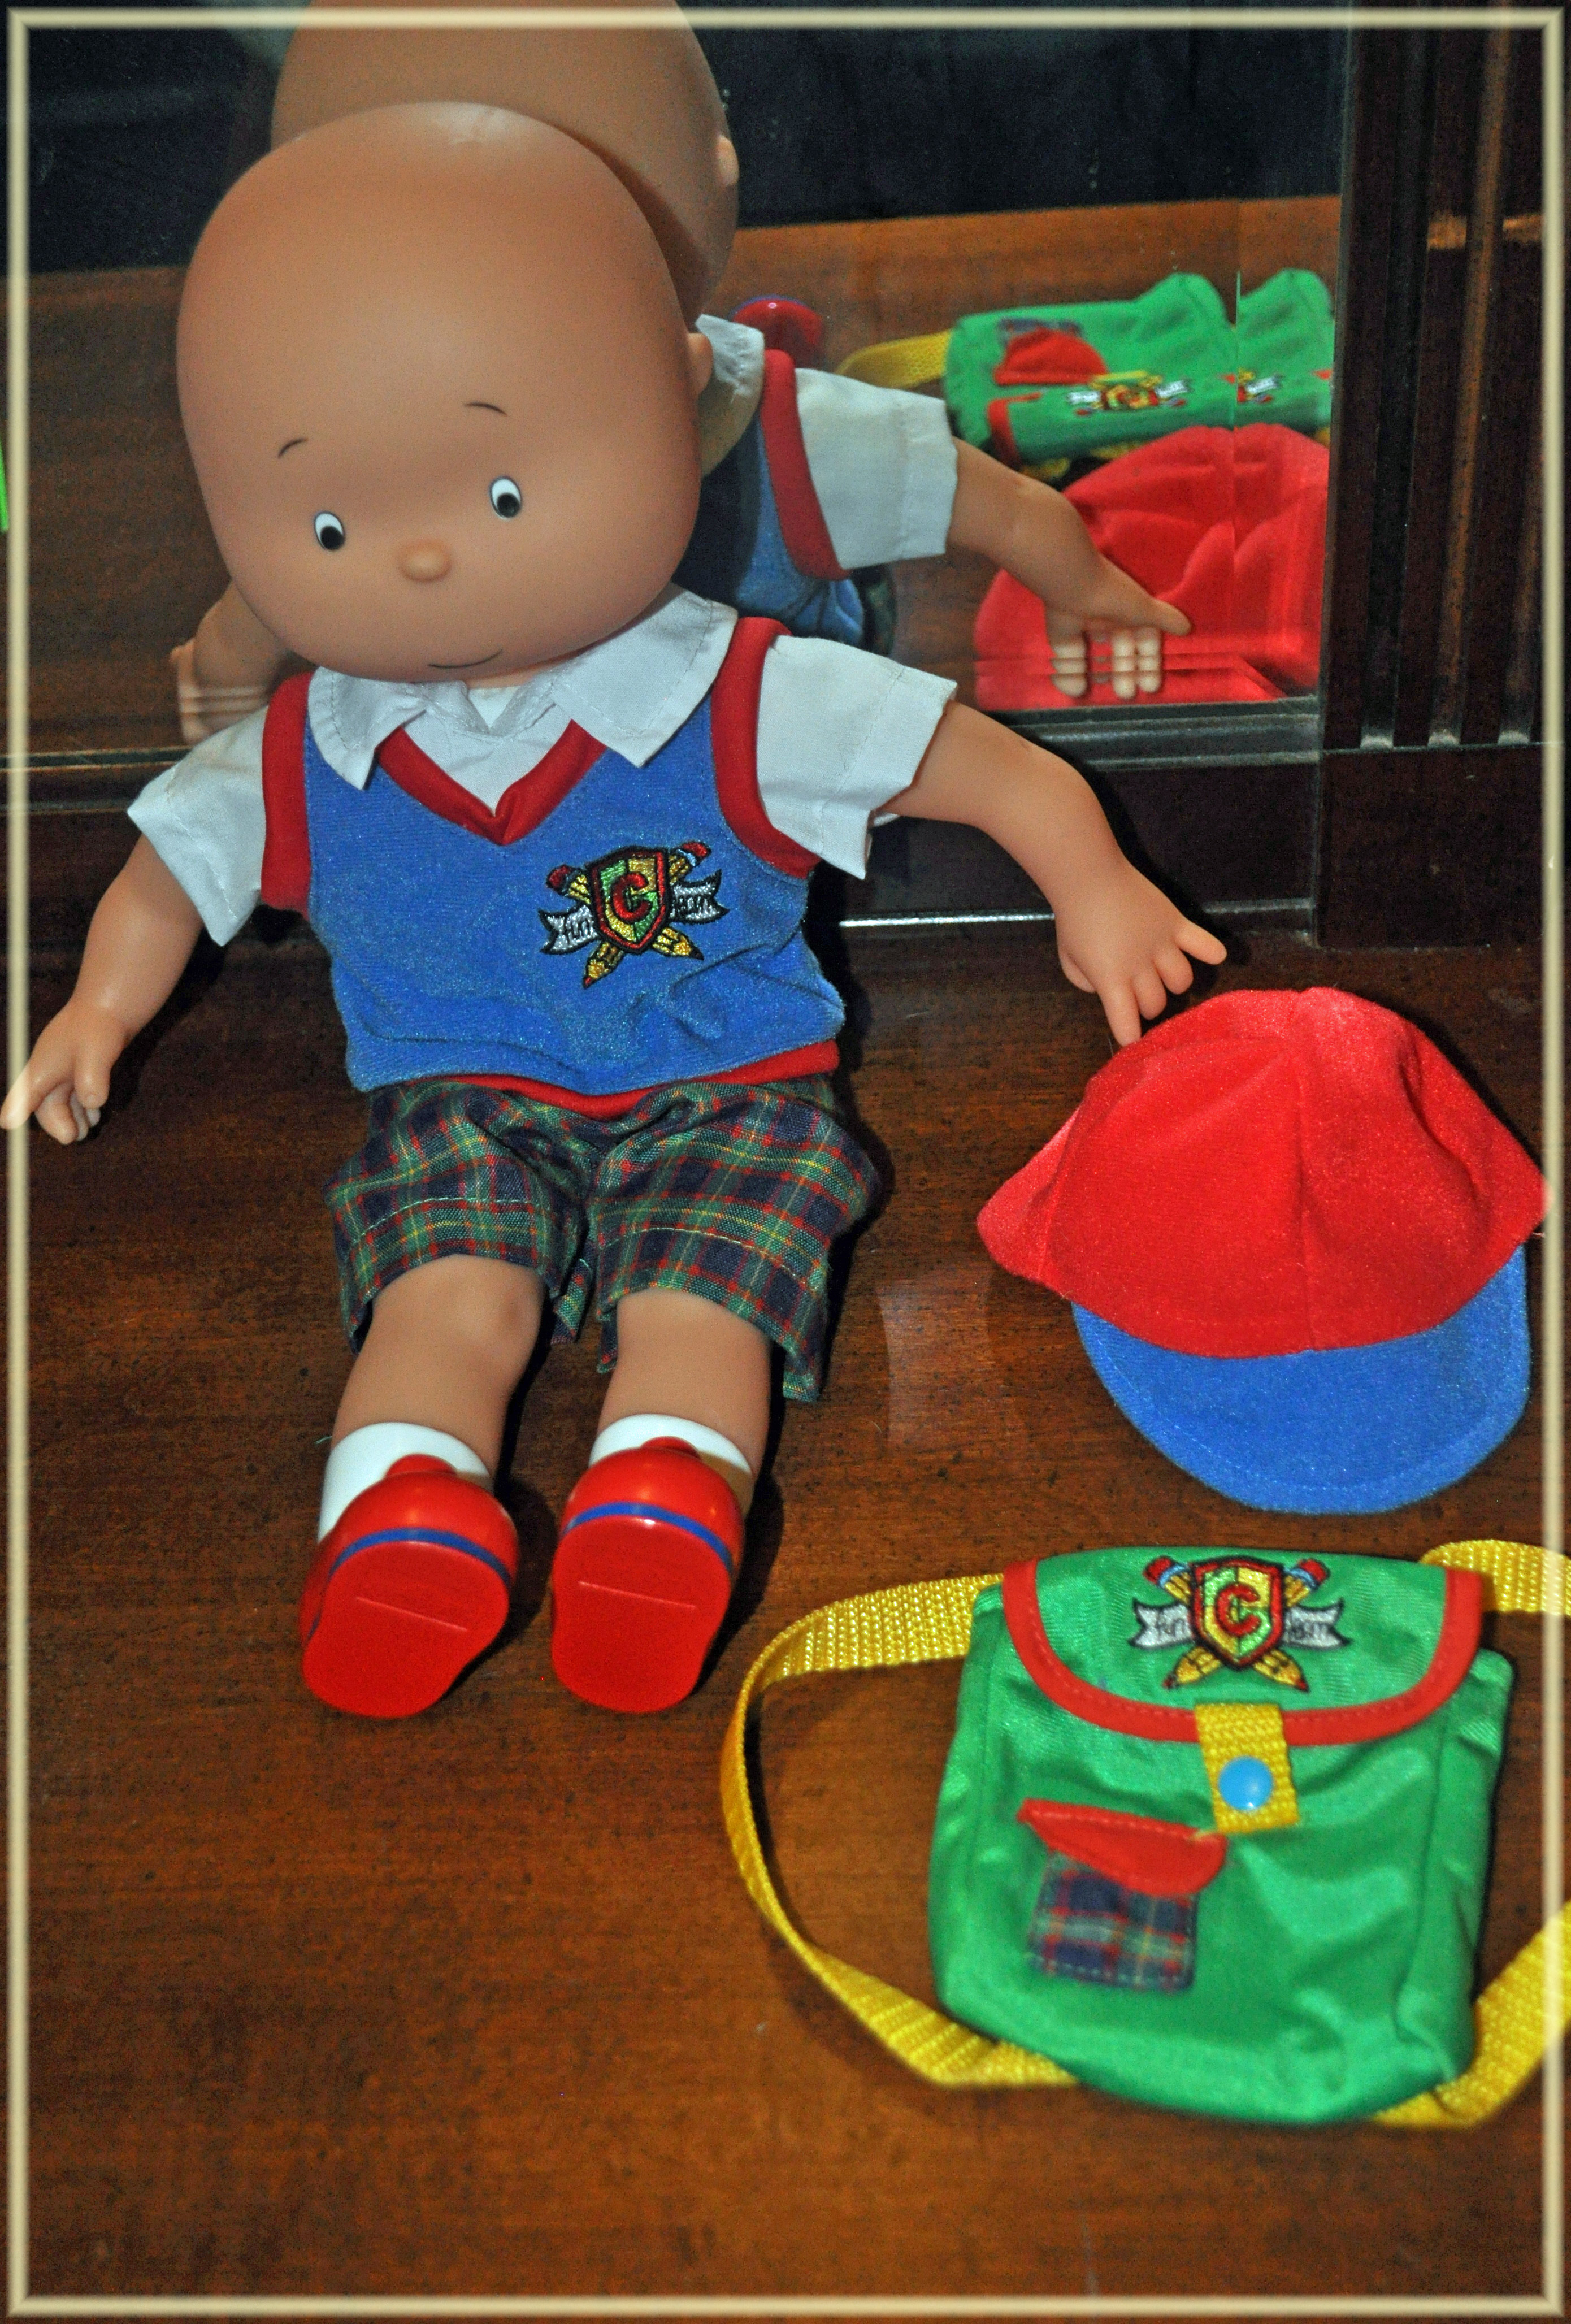 Where can you buy Caillou dolls?